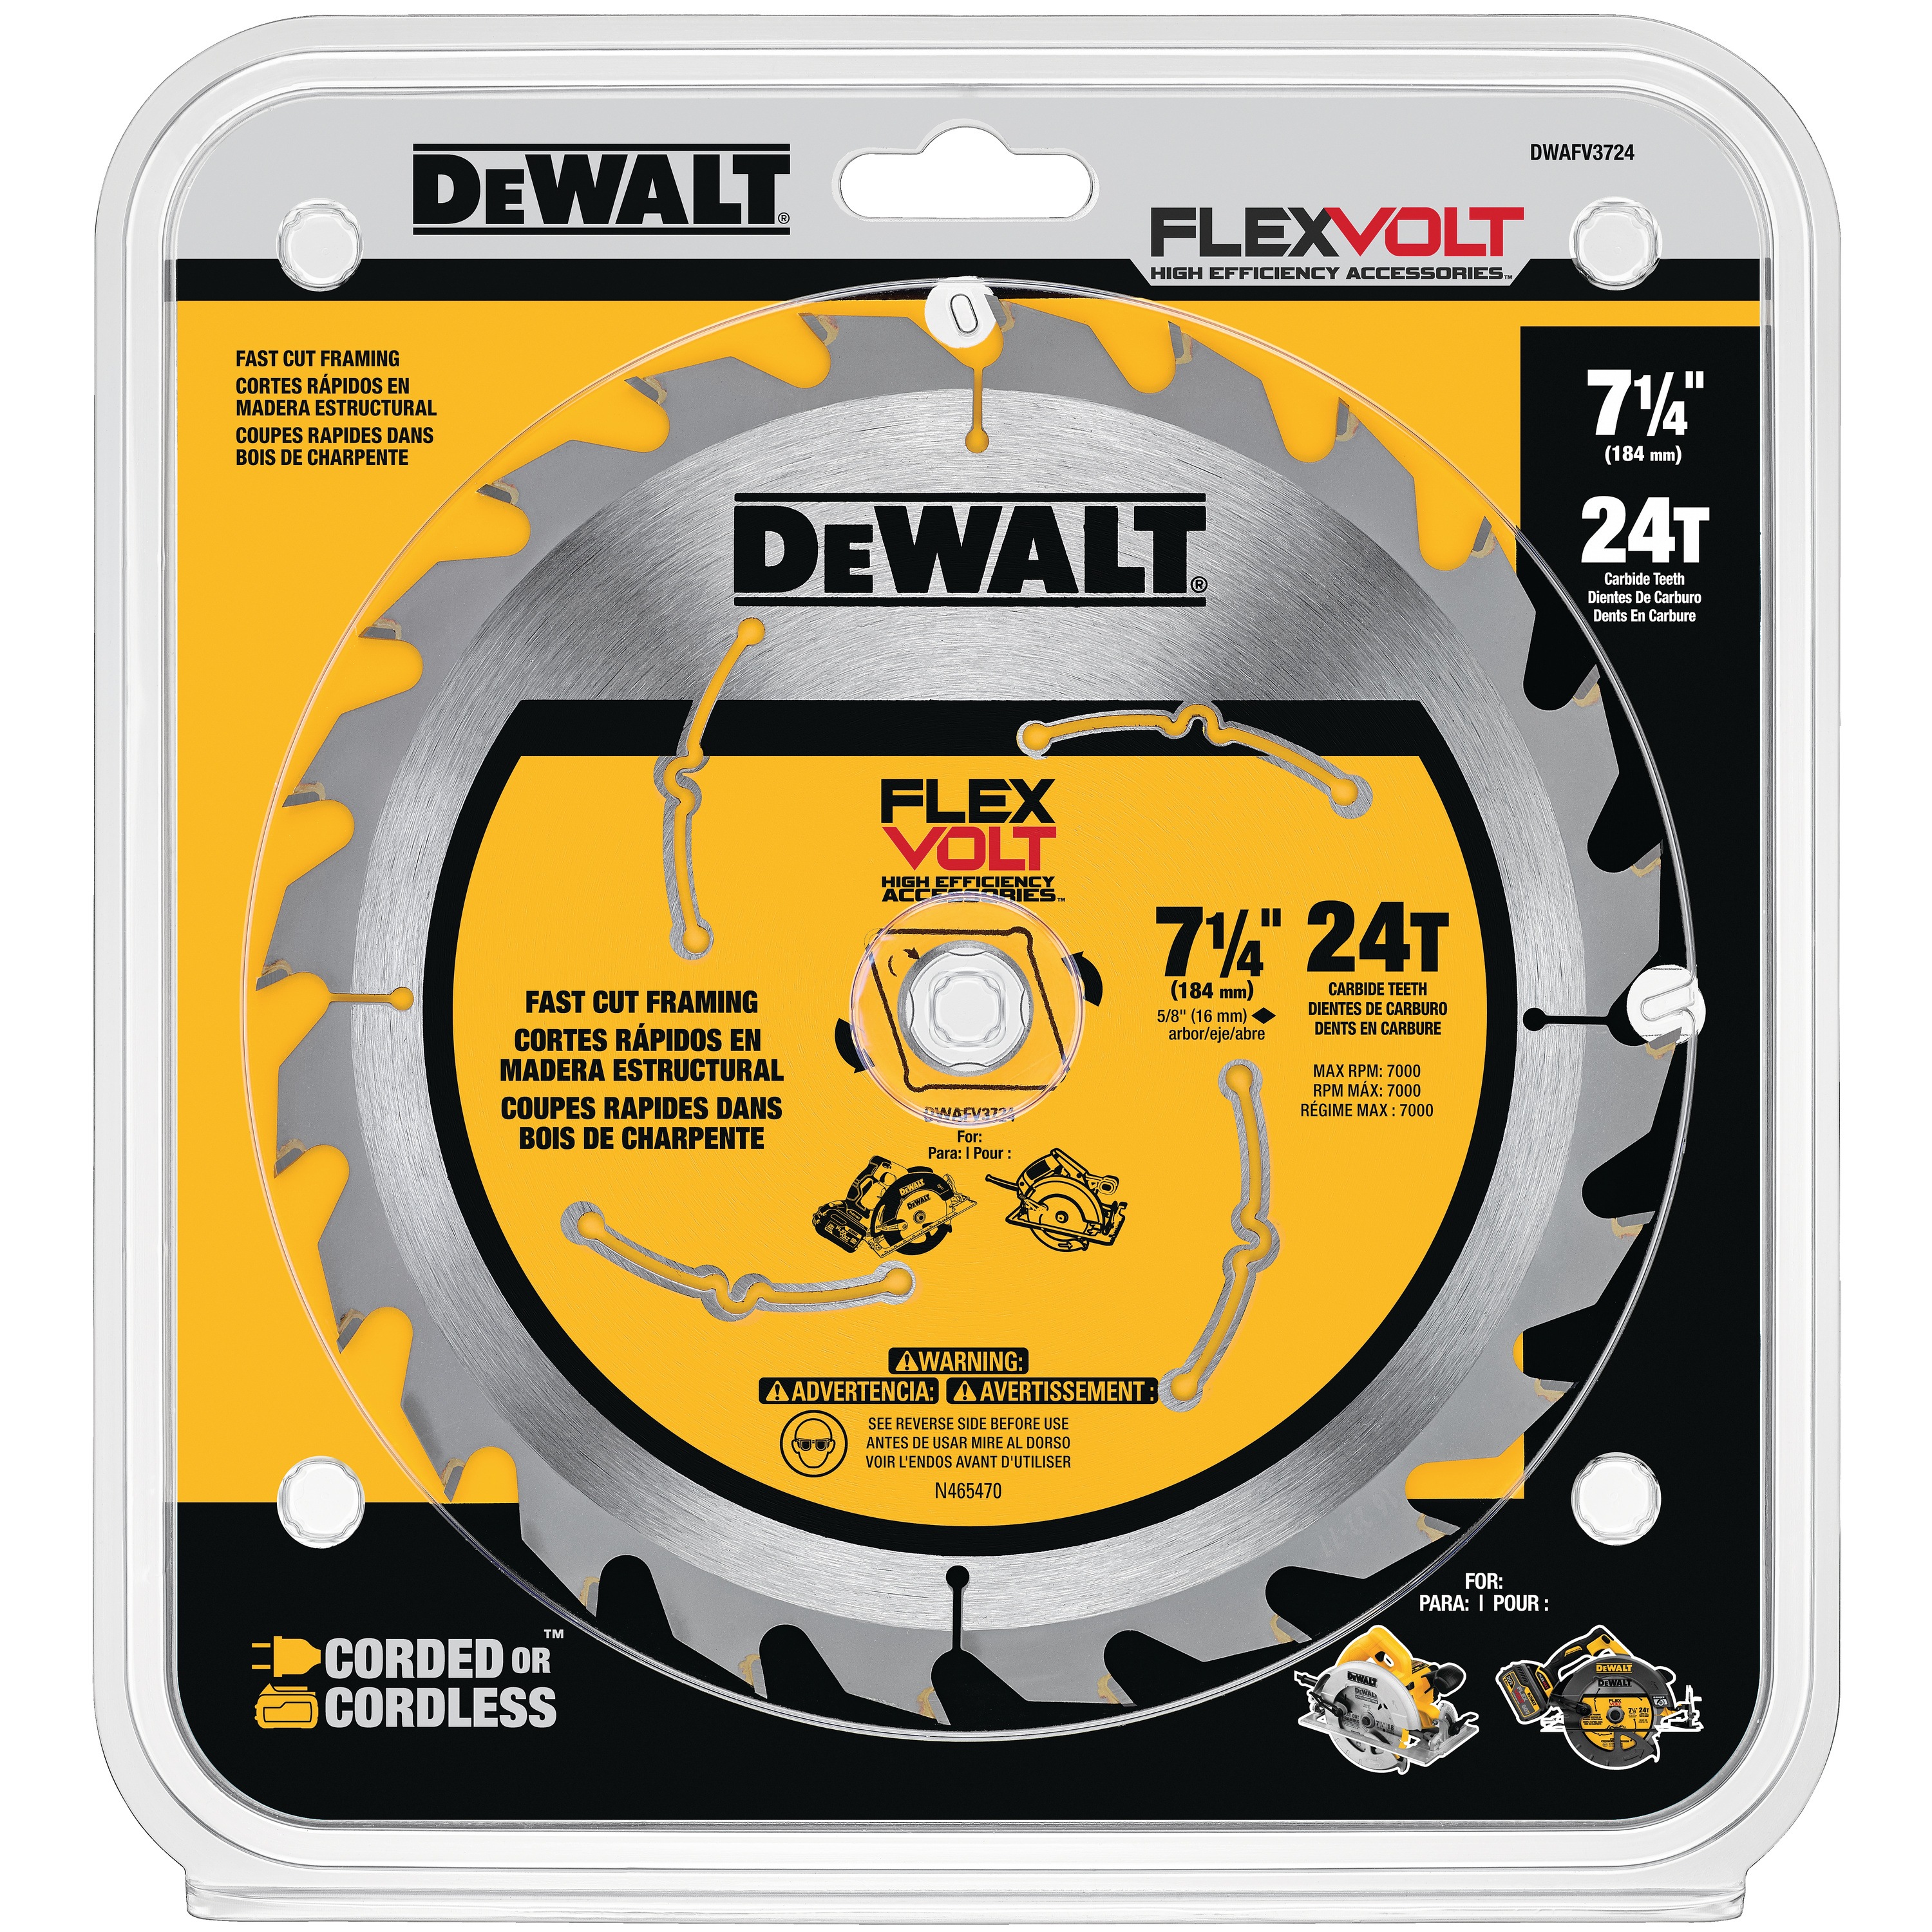 FLEXVOLT 7-quarter inch circular saw blade packed in a plastic cover.